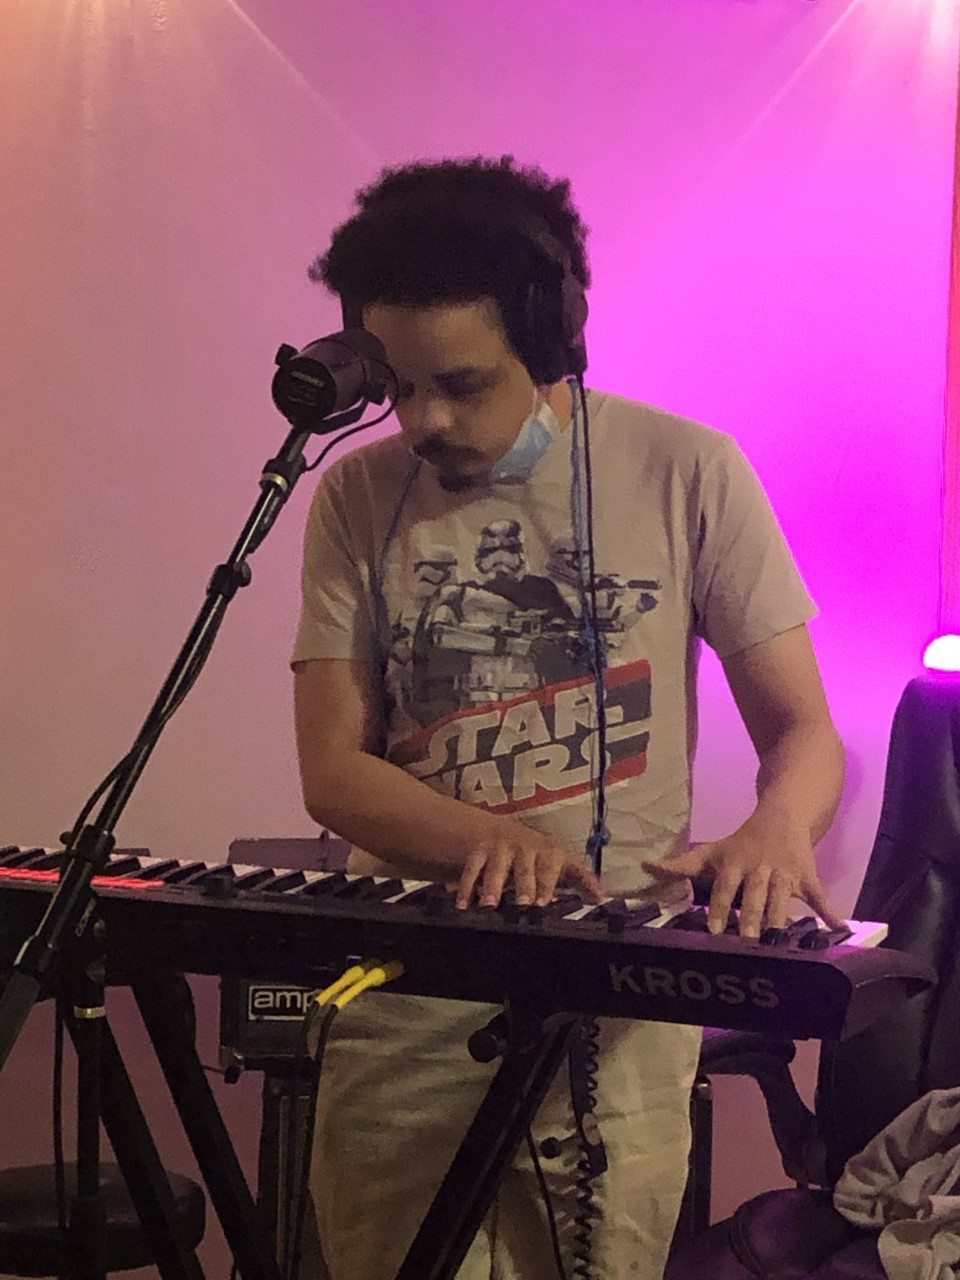 A blind man dressed in a Star Wars T-shirt, depicting storm troopers, plays keyboard with a microphone in front of him and a pink screen in the background. He wears black headphones and a surgical mask pulled down around his chin.